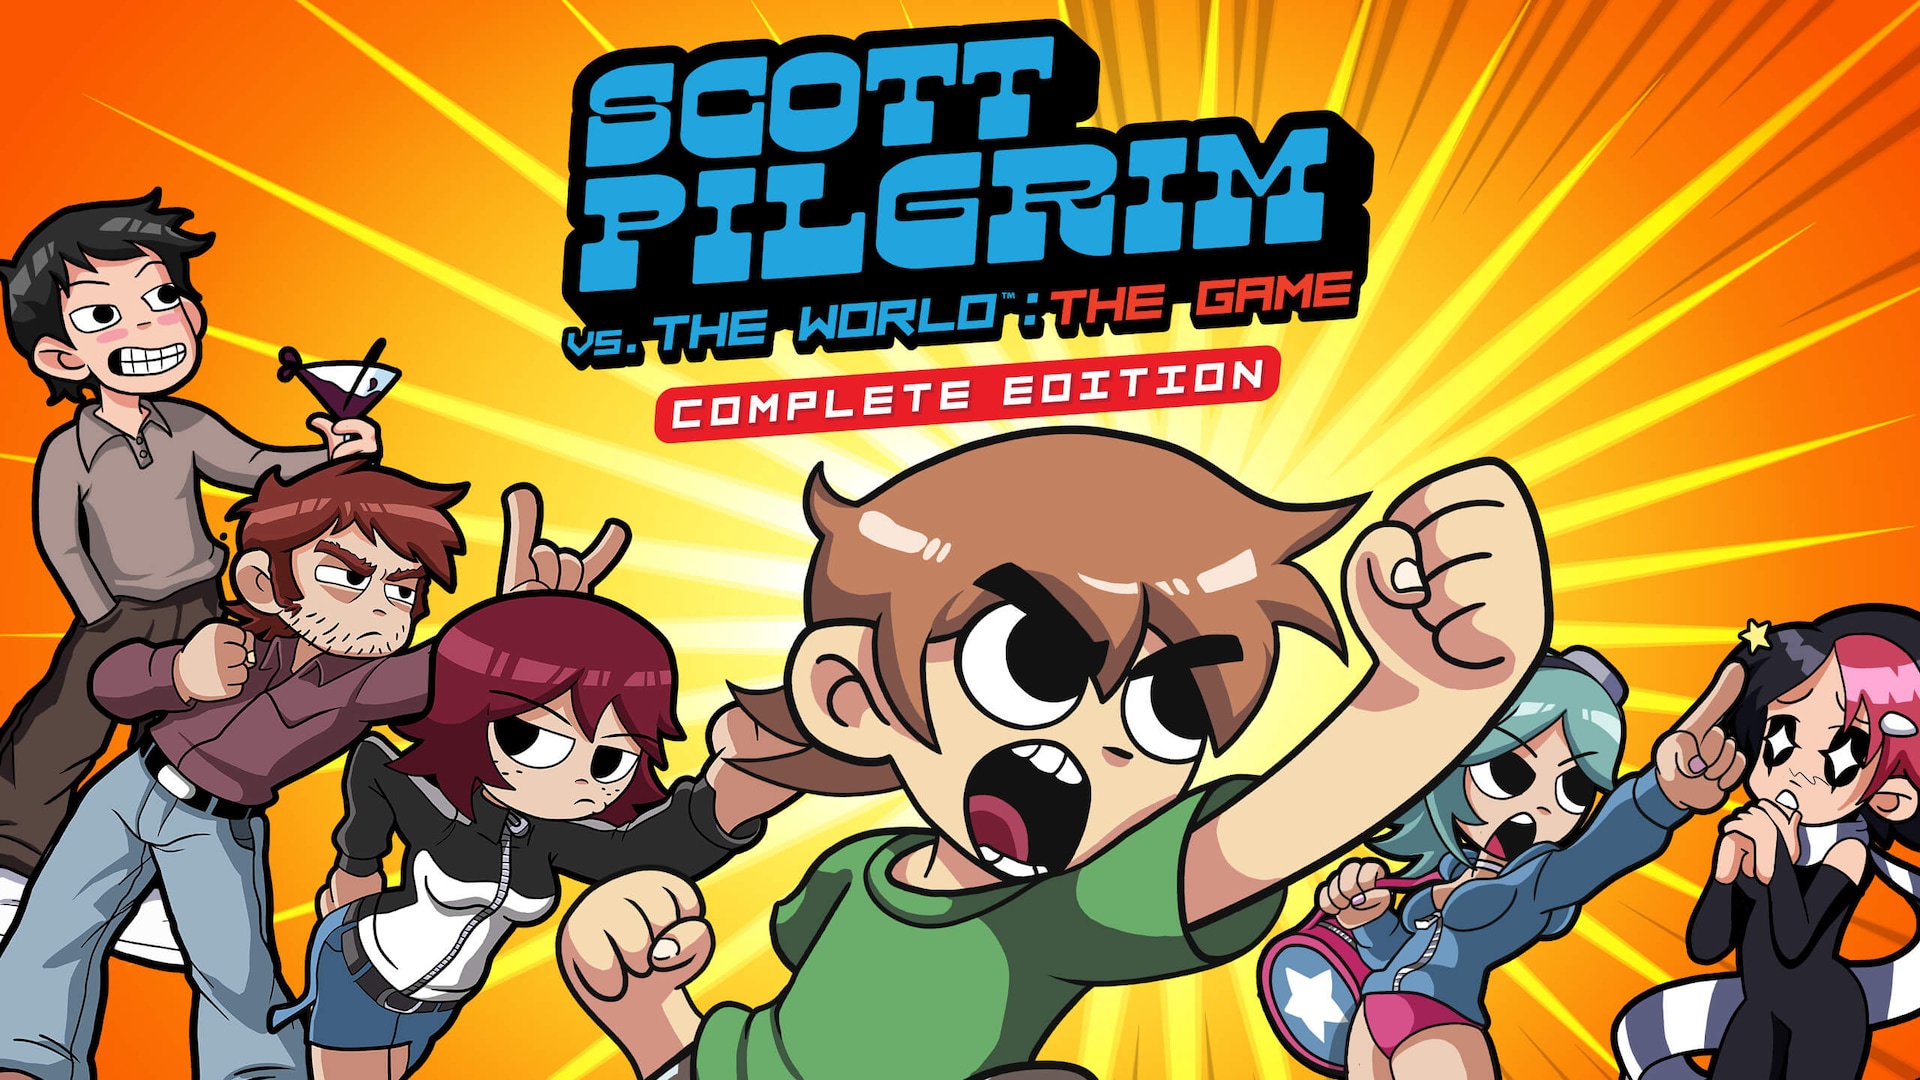 Promotional art for “Scott Pilgrim vs. The World: The Game - Complete Edition," including Scott, Ramona, Knives, Kim, Stephen, and Wallace.